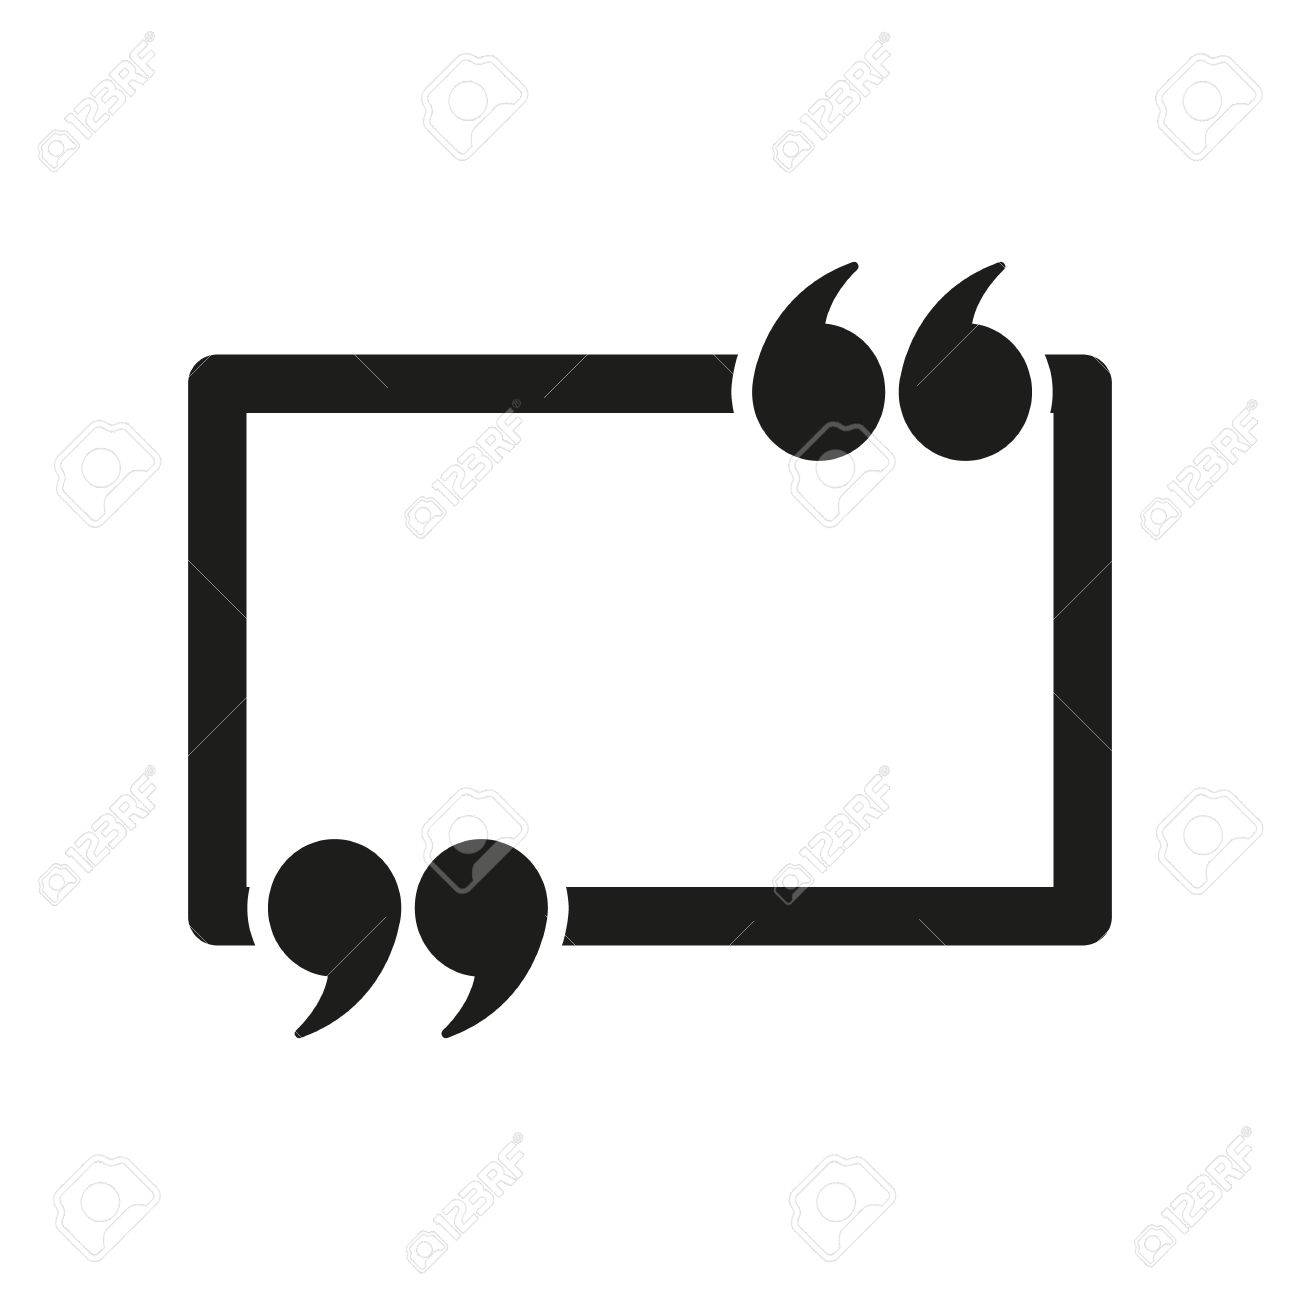 The Quotation Mark Speech Bubble icon. Quotes, citation, opinion 